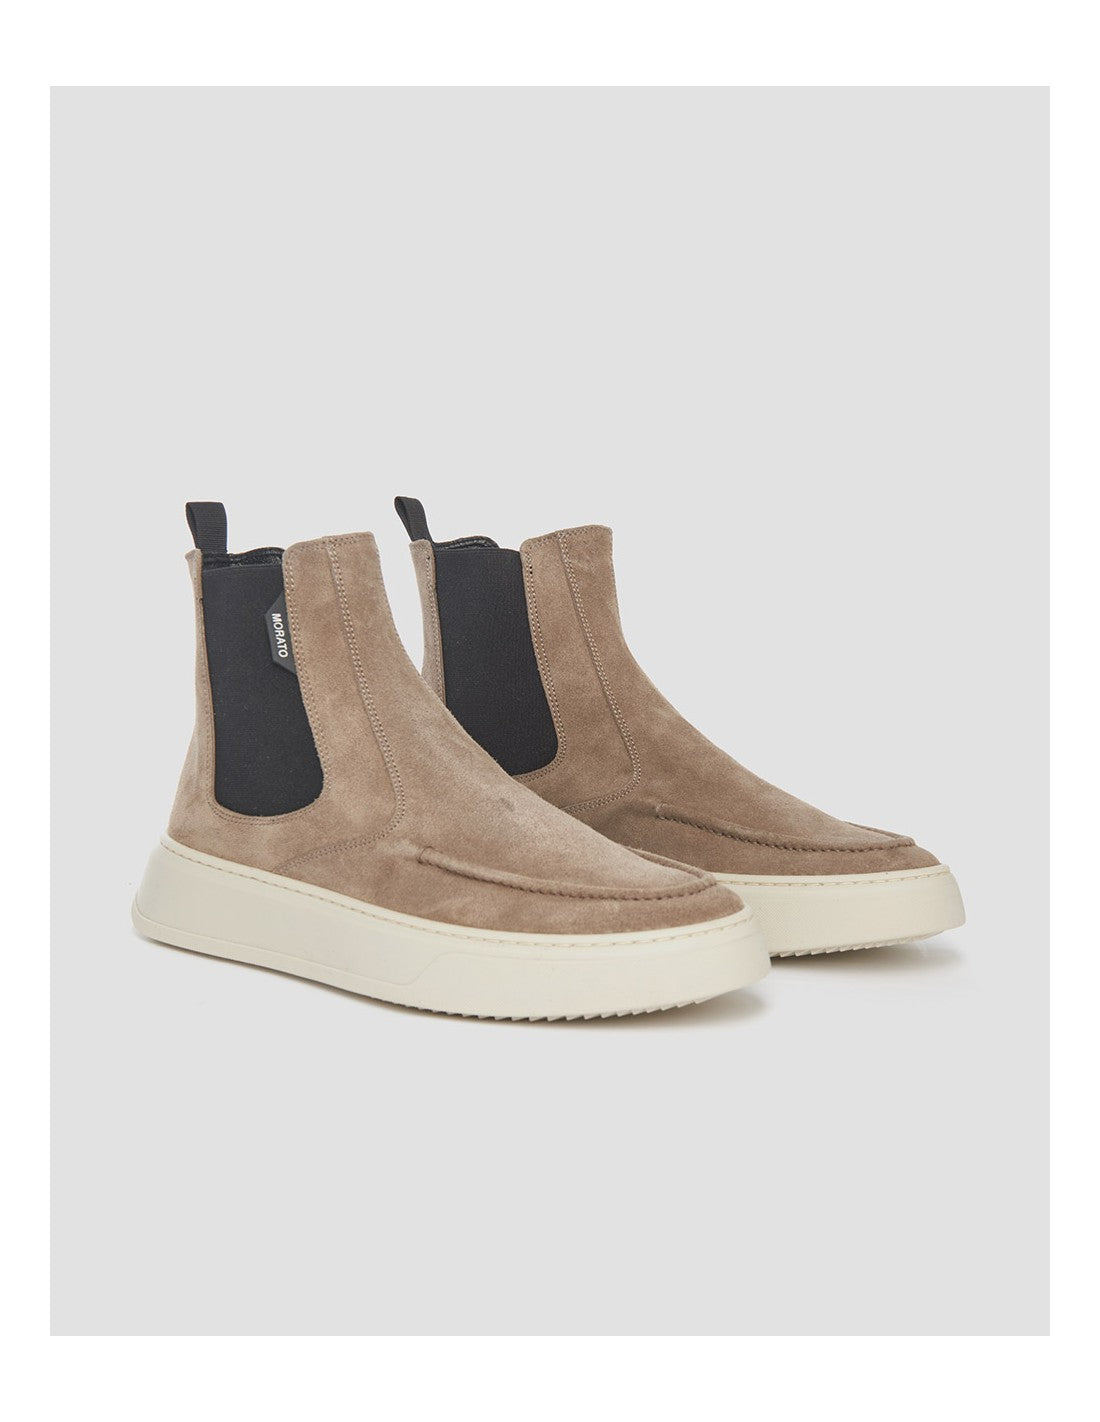 Anthony Morato - SNEAKER SLIP ON Shoes Anthony Morato Brown 41 